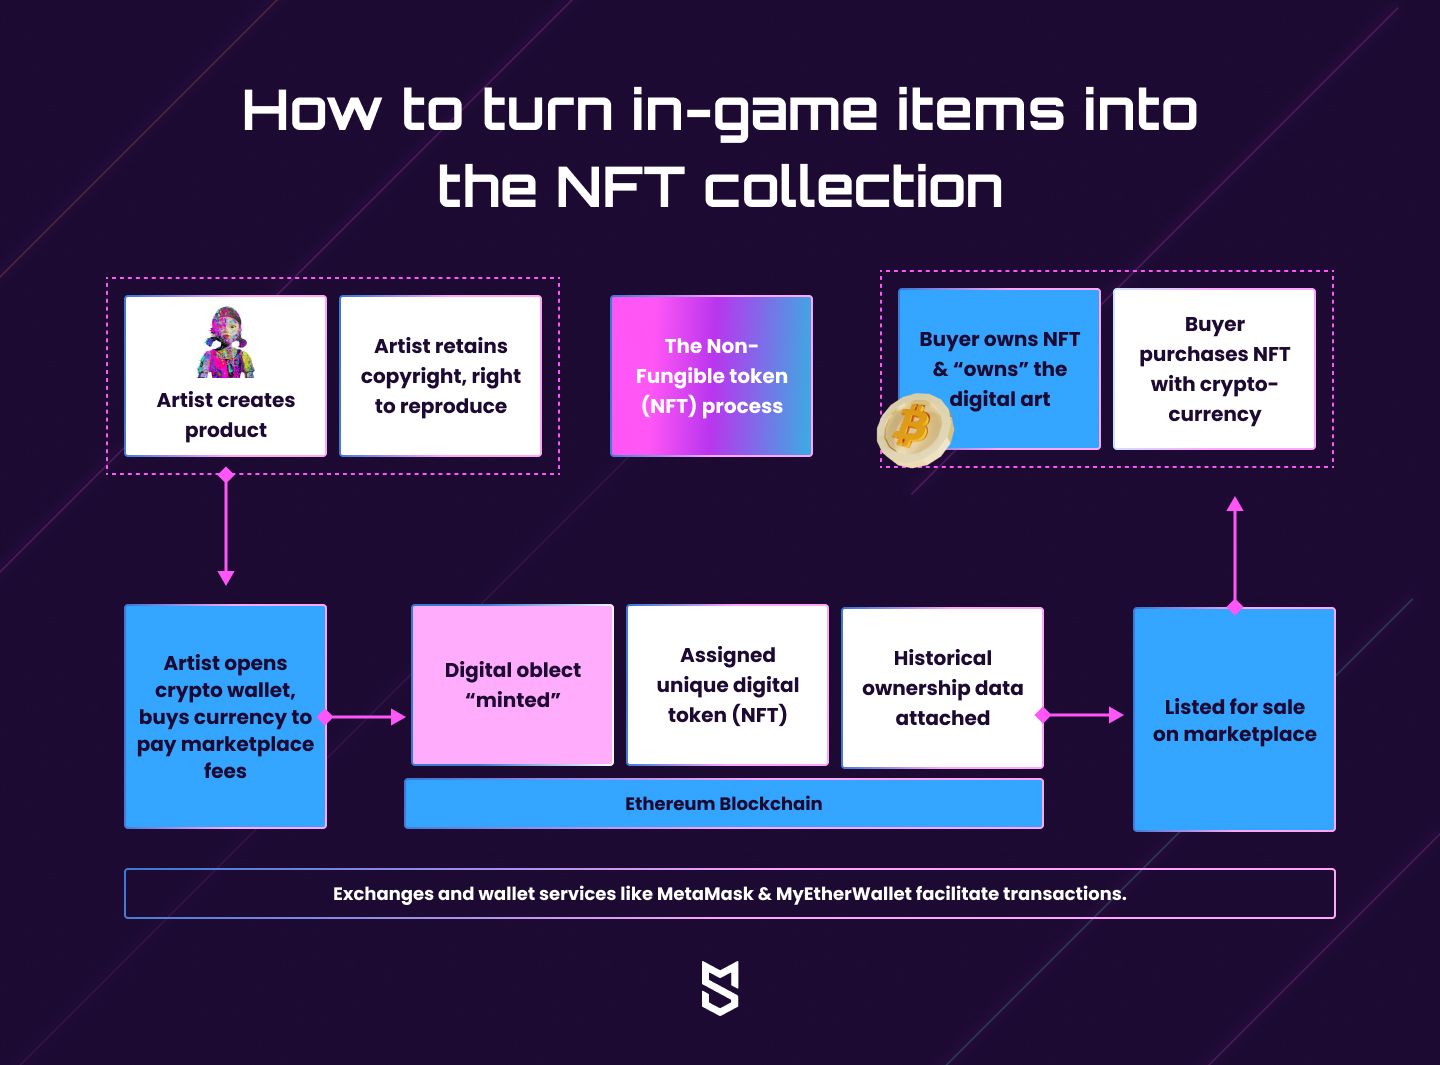 How to turn in-game items into the NFT collection